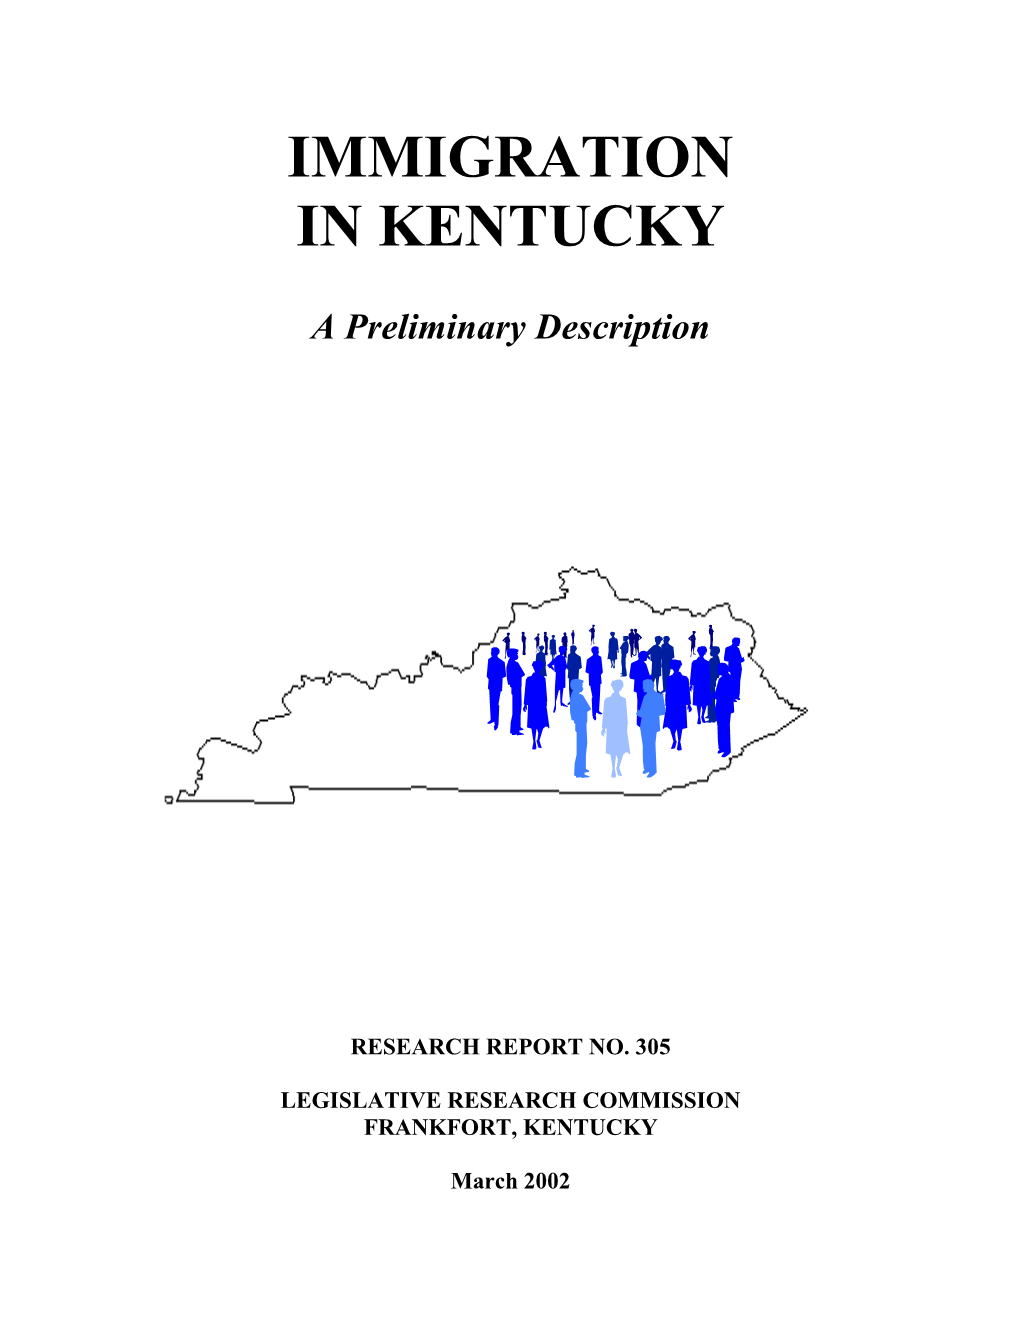 Immigration in Kentucky